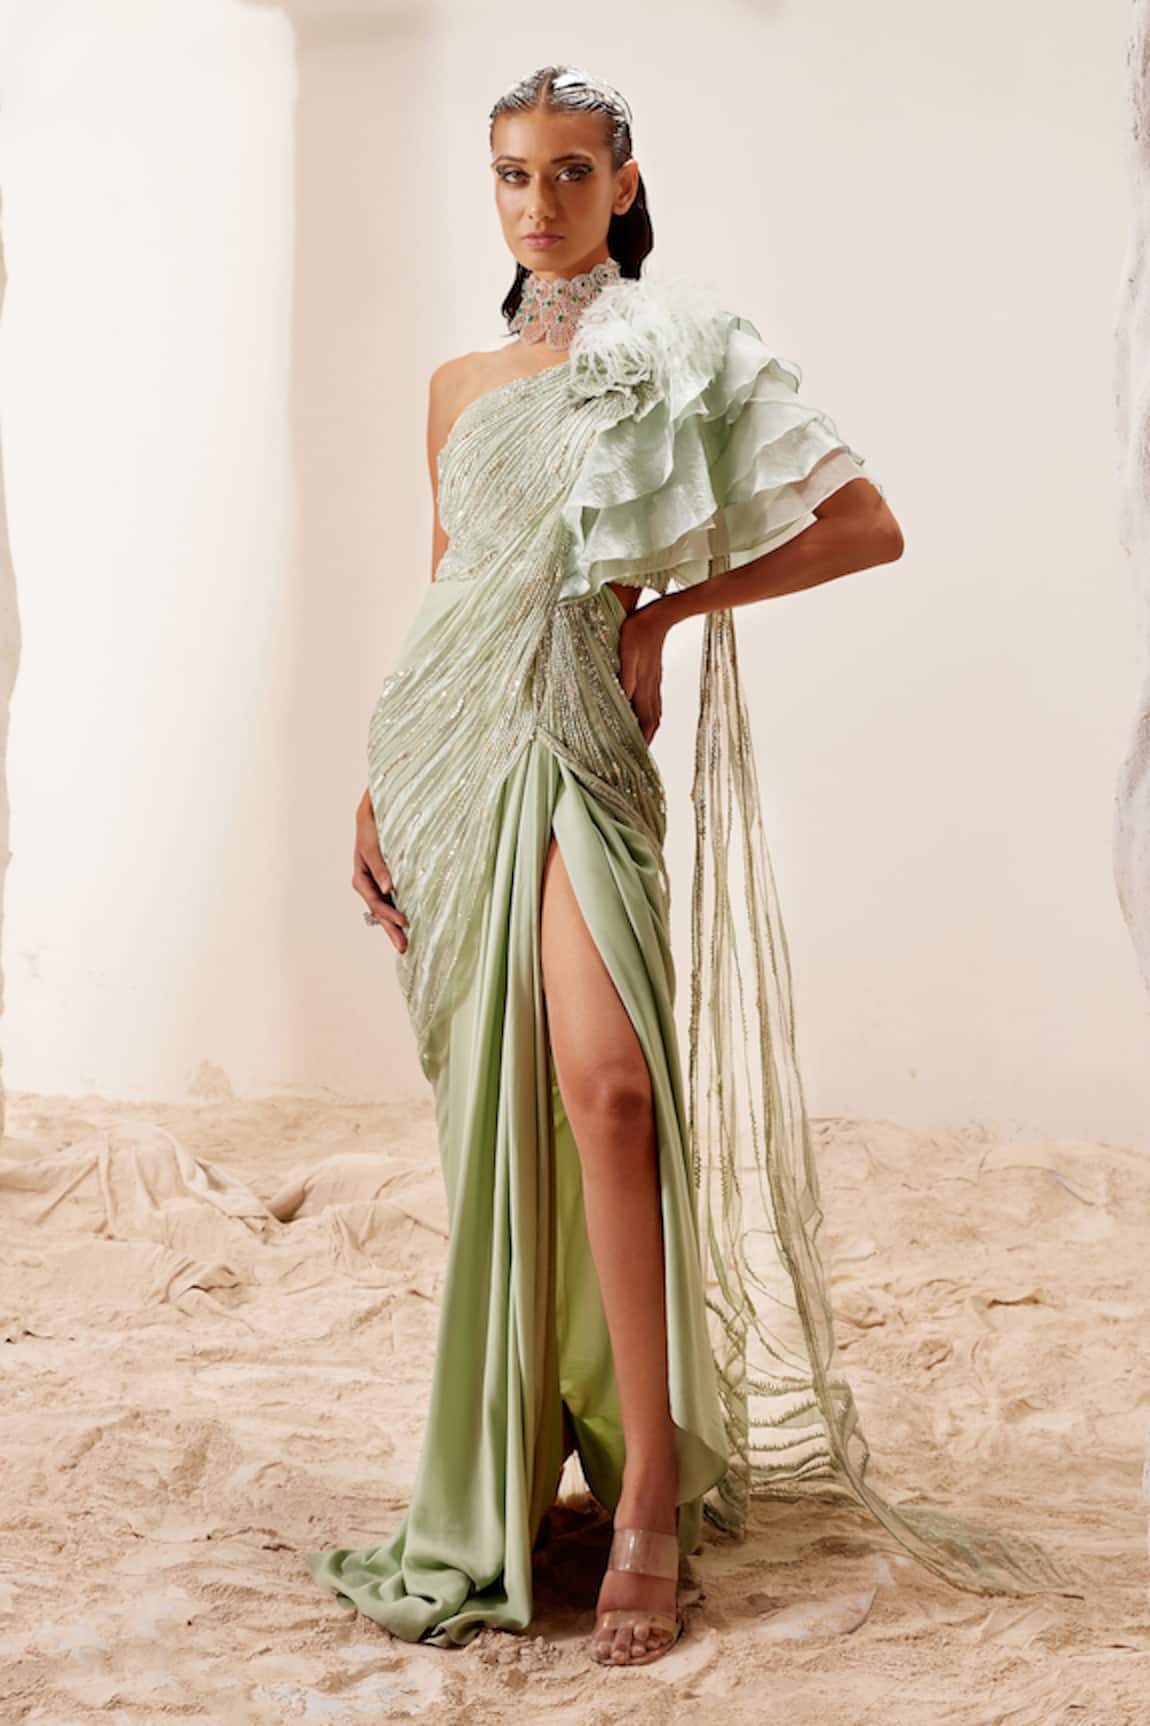 Adaara Couture Hand Embroidered Draped Saree Gown